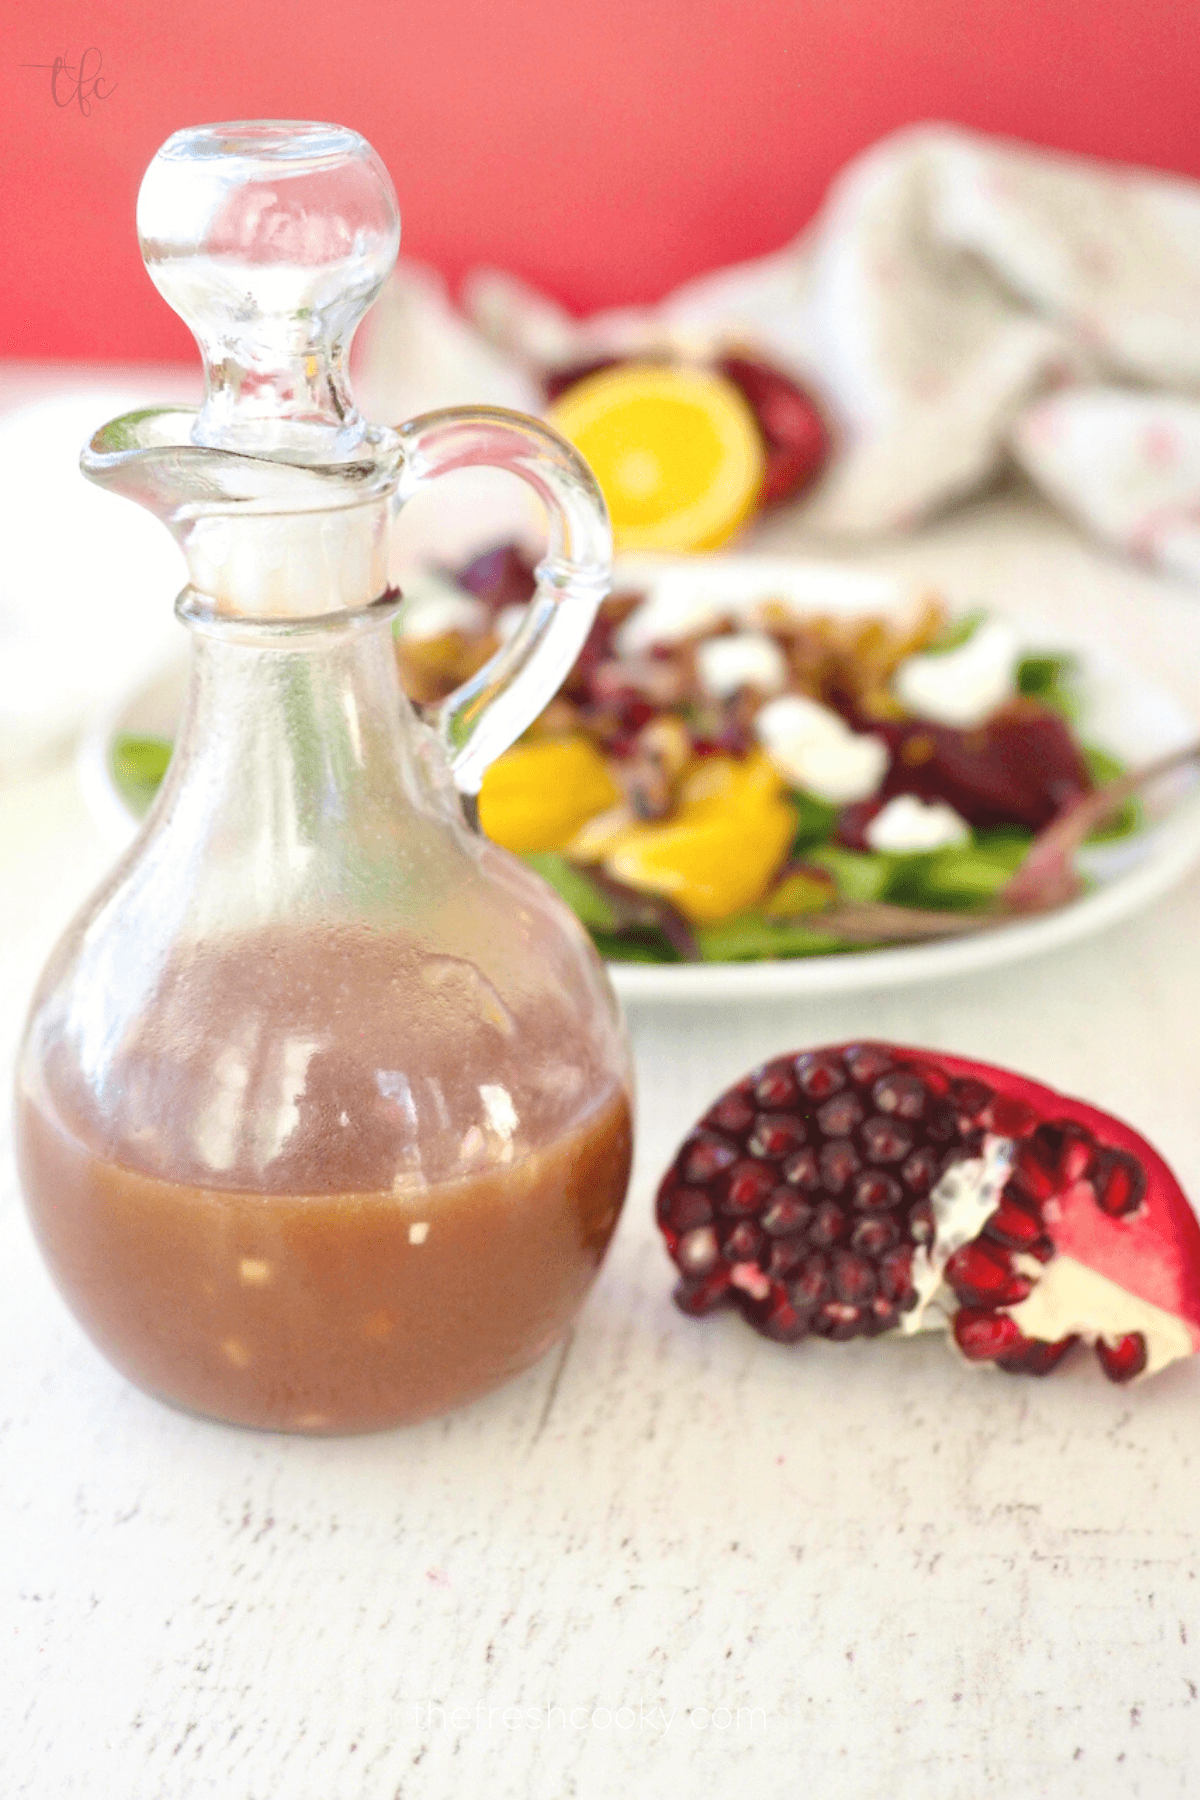 Cruet filled with pomegranate dressing for salad.